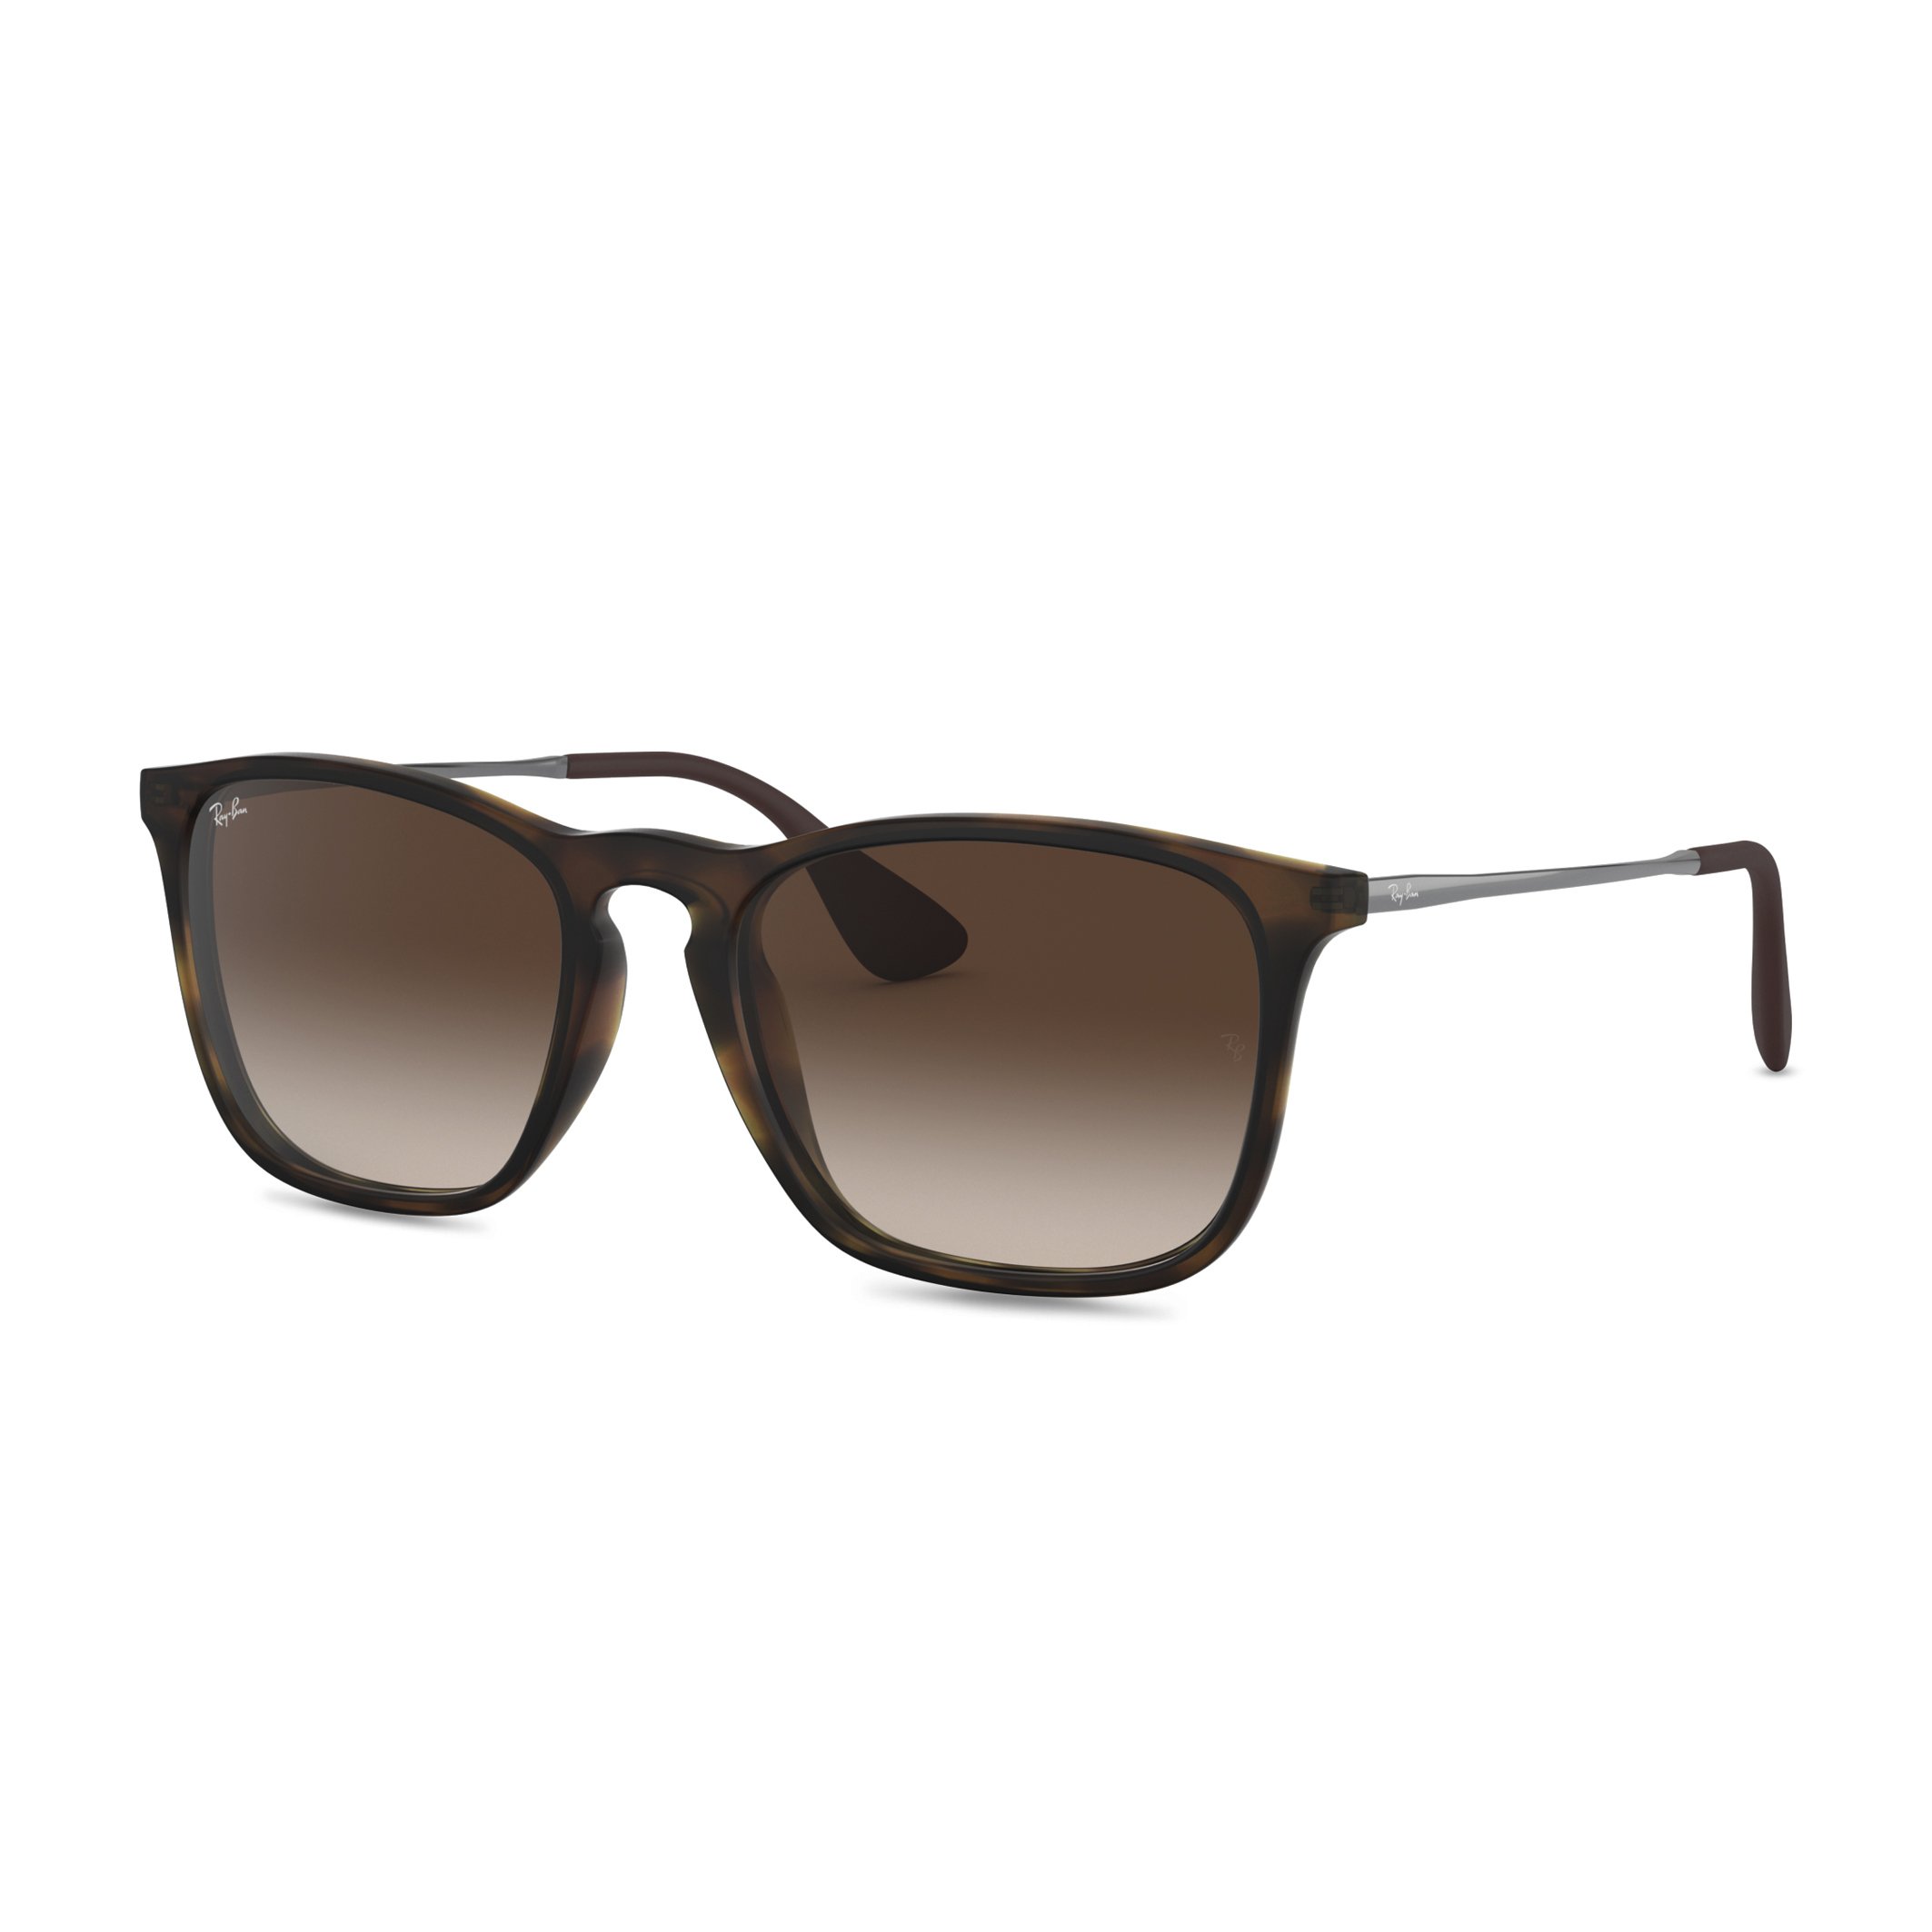 Ray-Ban Unisex Sunglasses Various Colours 0RB4187F - brown-1 NOSIZE